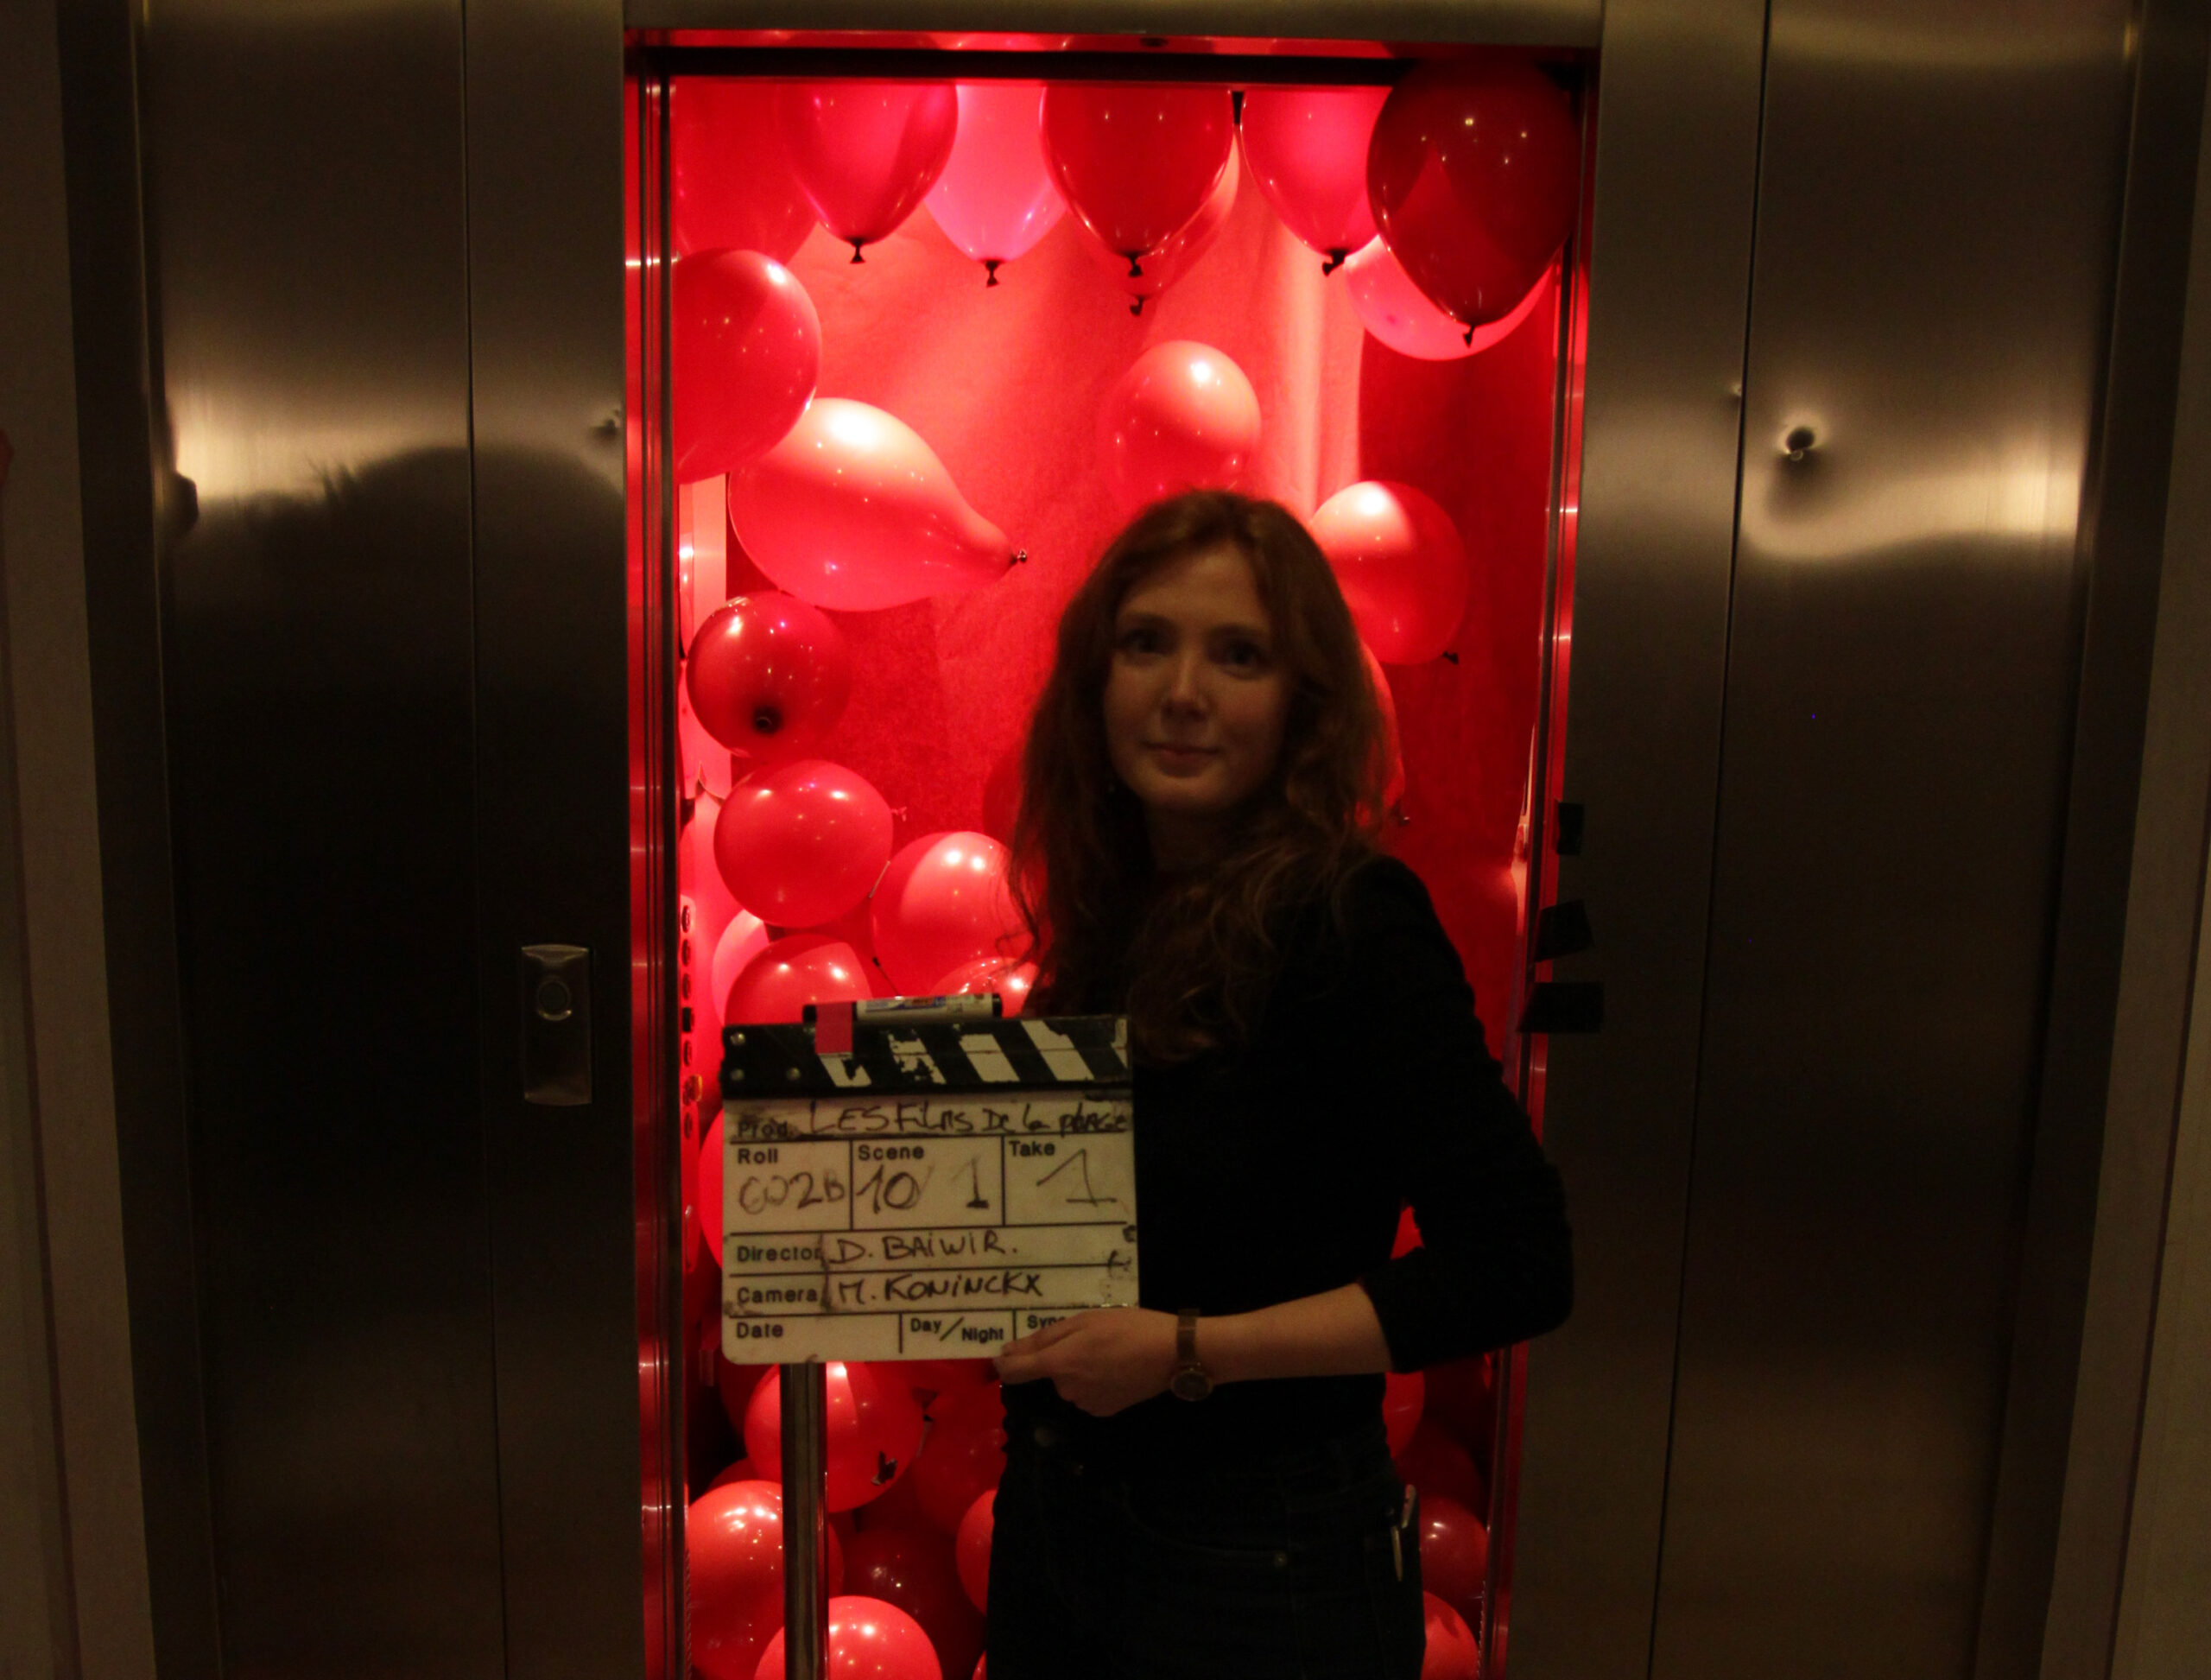 Director Daphné Baiwir in front of an open elevator filled with red balloons